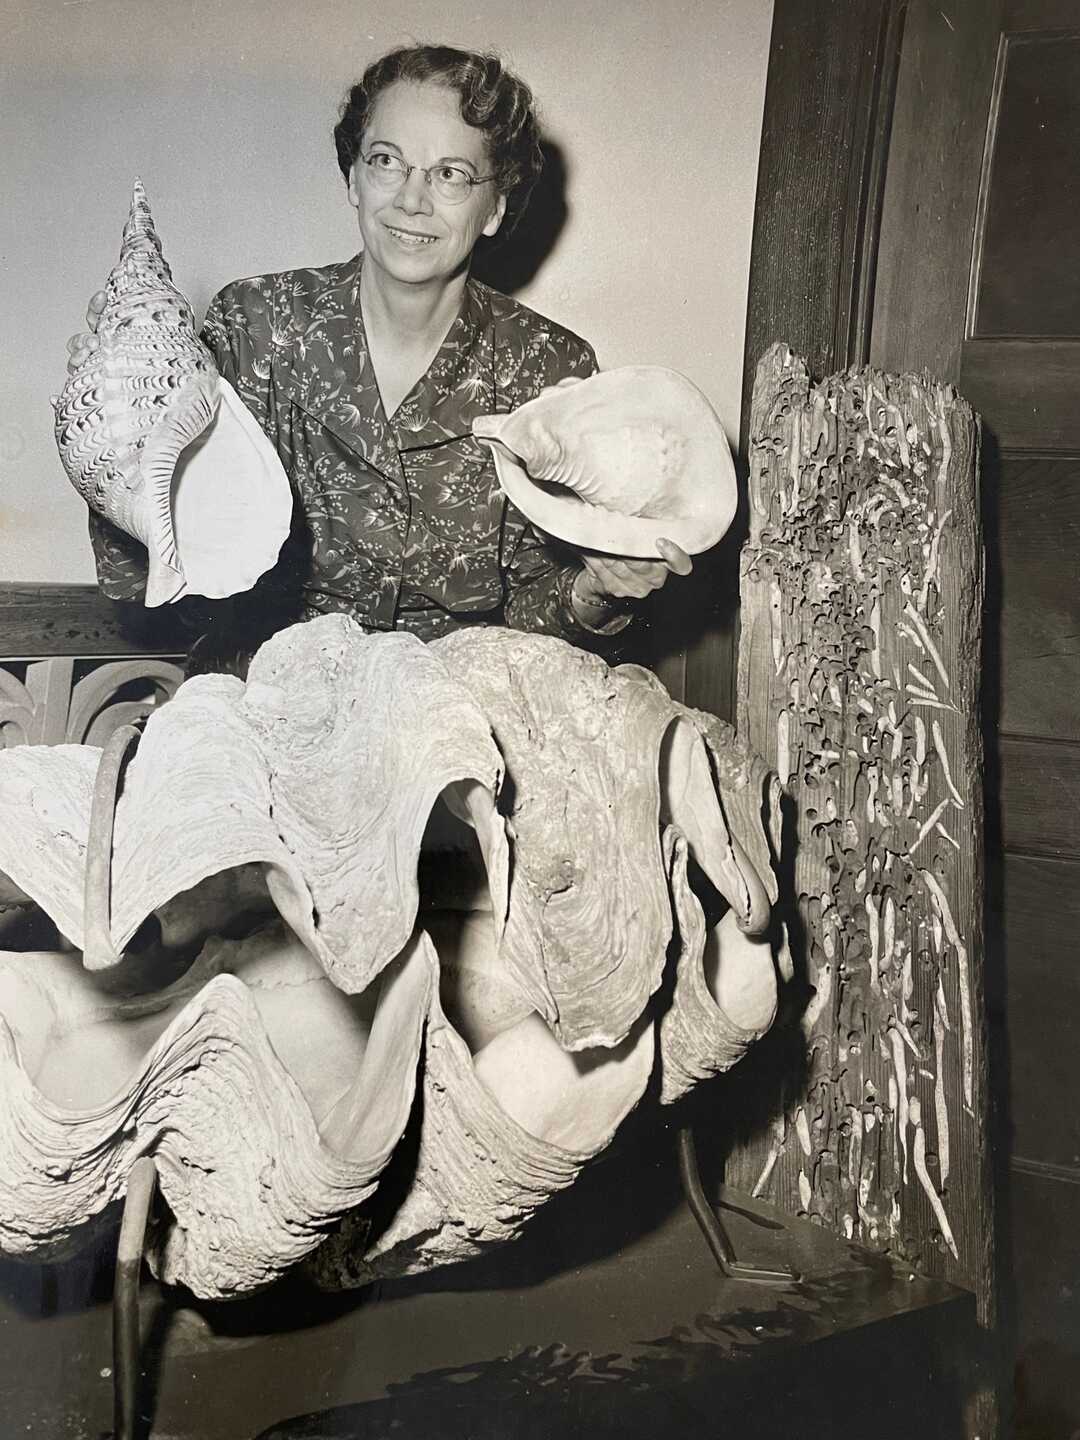 Myra Keen holds up two conch shells as she sits behind a larger clam shell in a black and white vintage photograph.